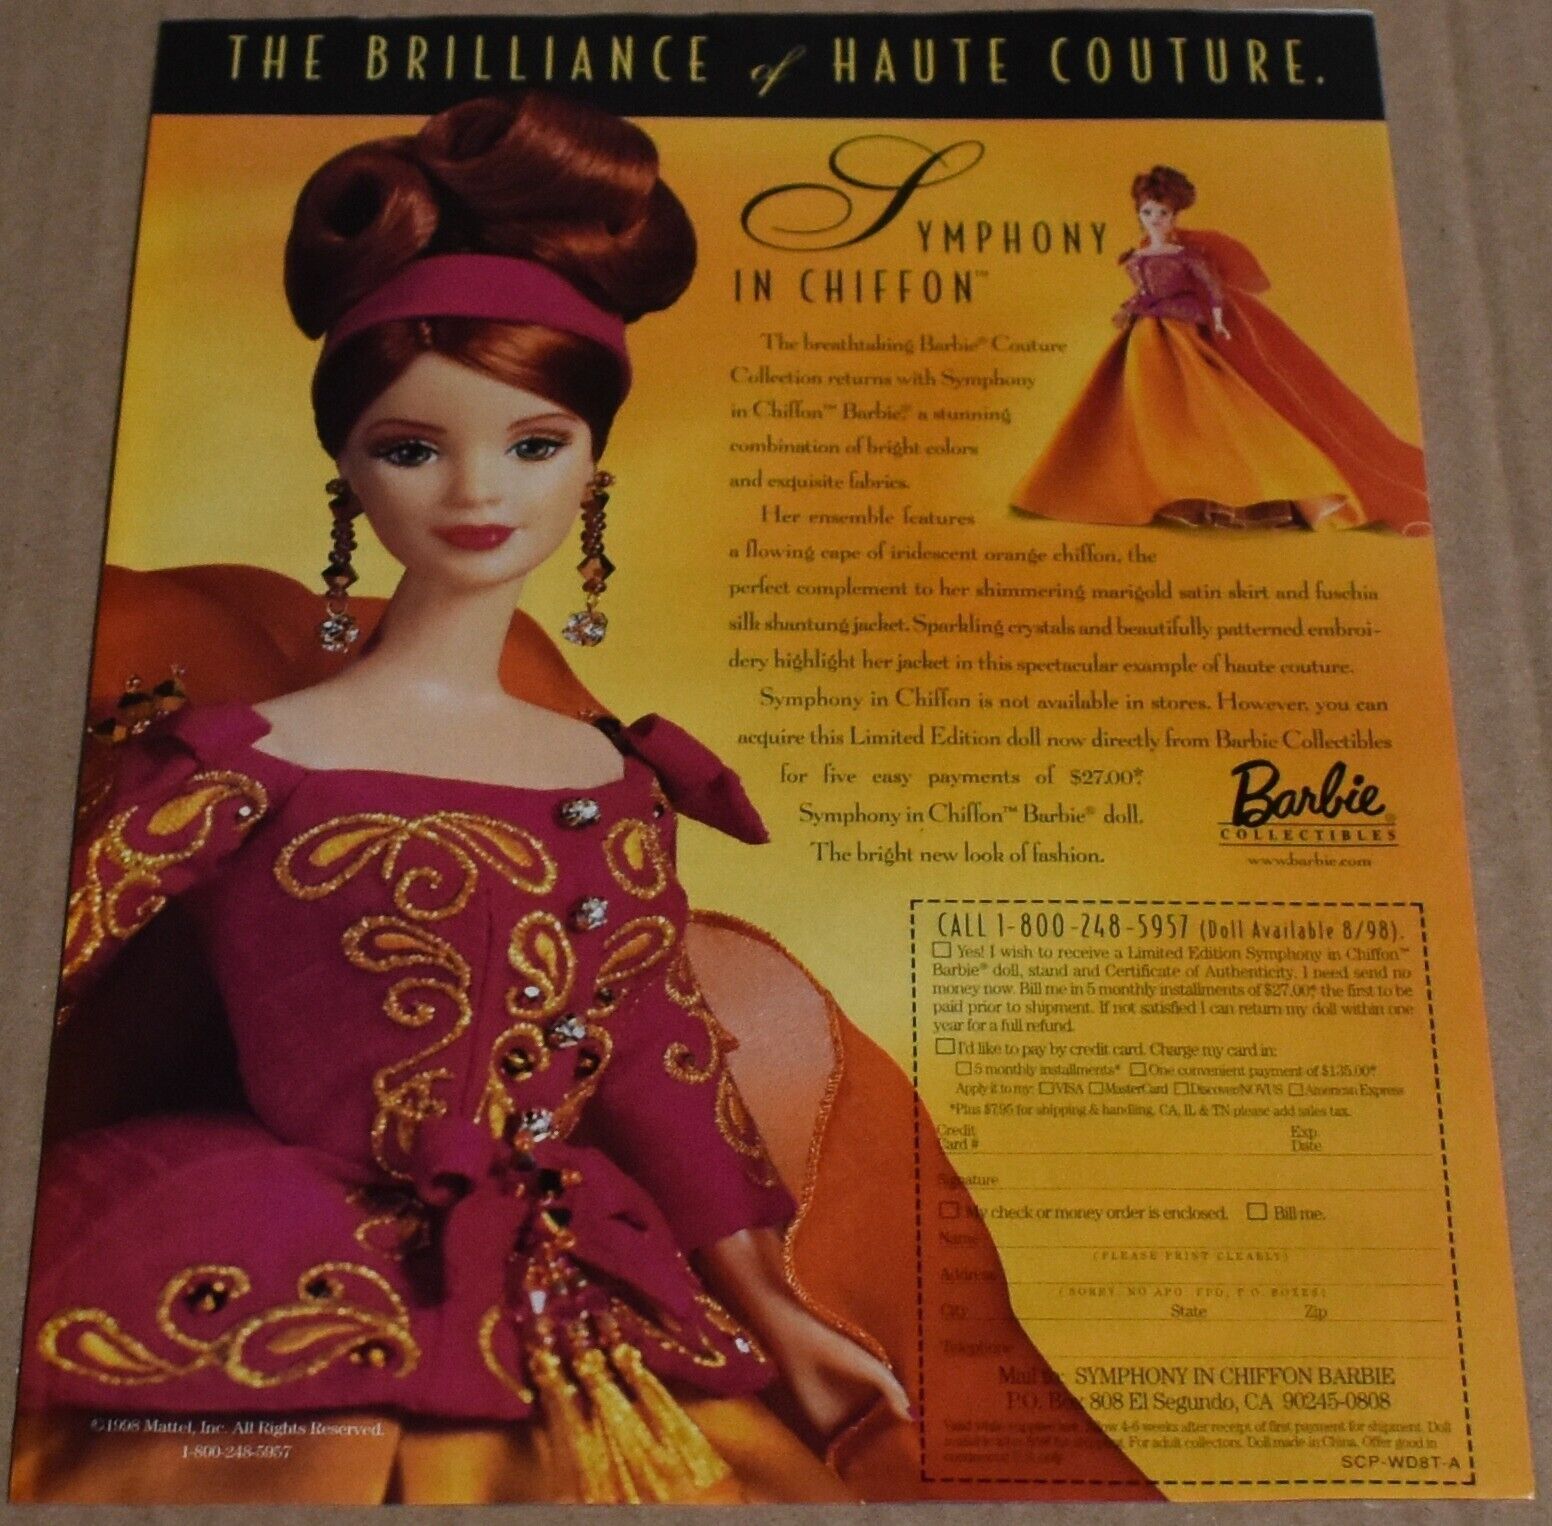 1998 Print Ad Brilliance of Haute Couture Symphony in Chiffon Barbie Doll Art